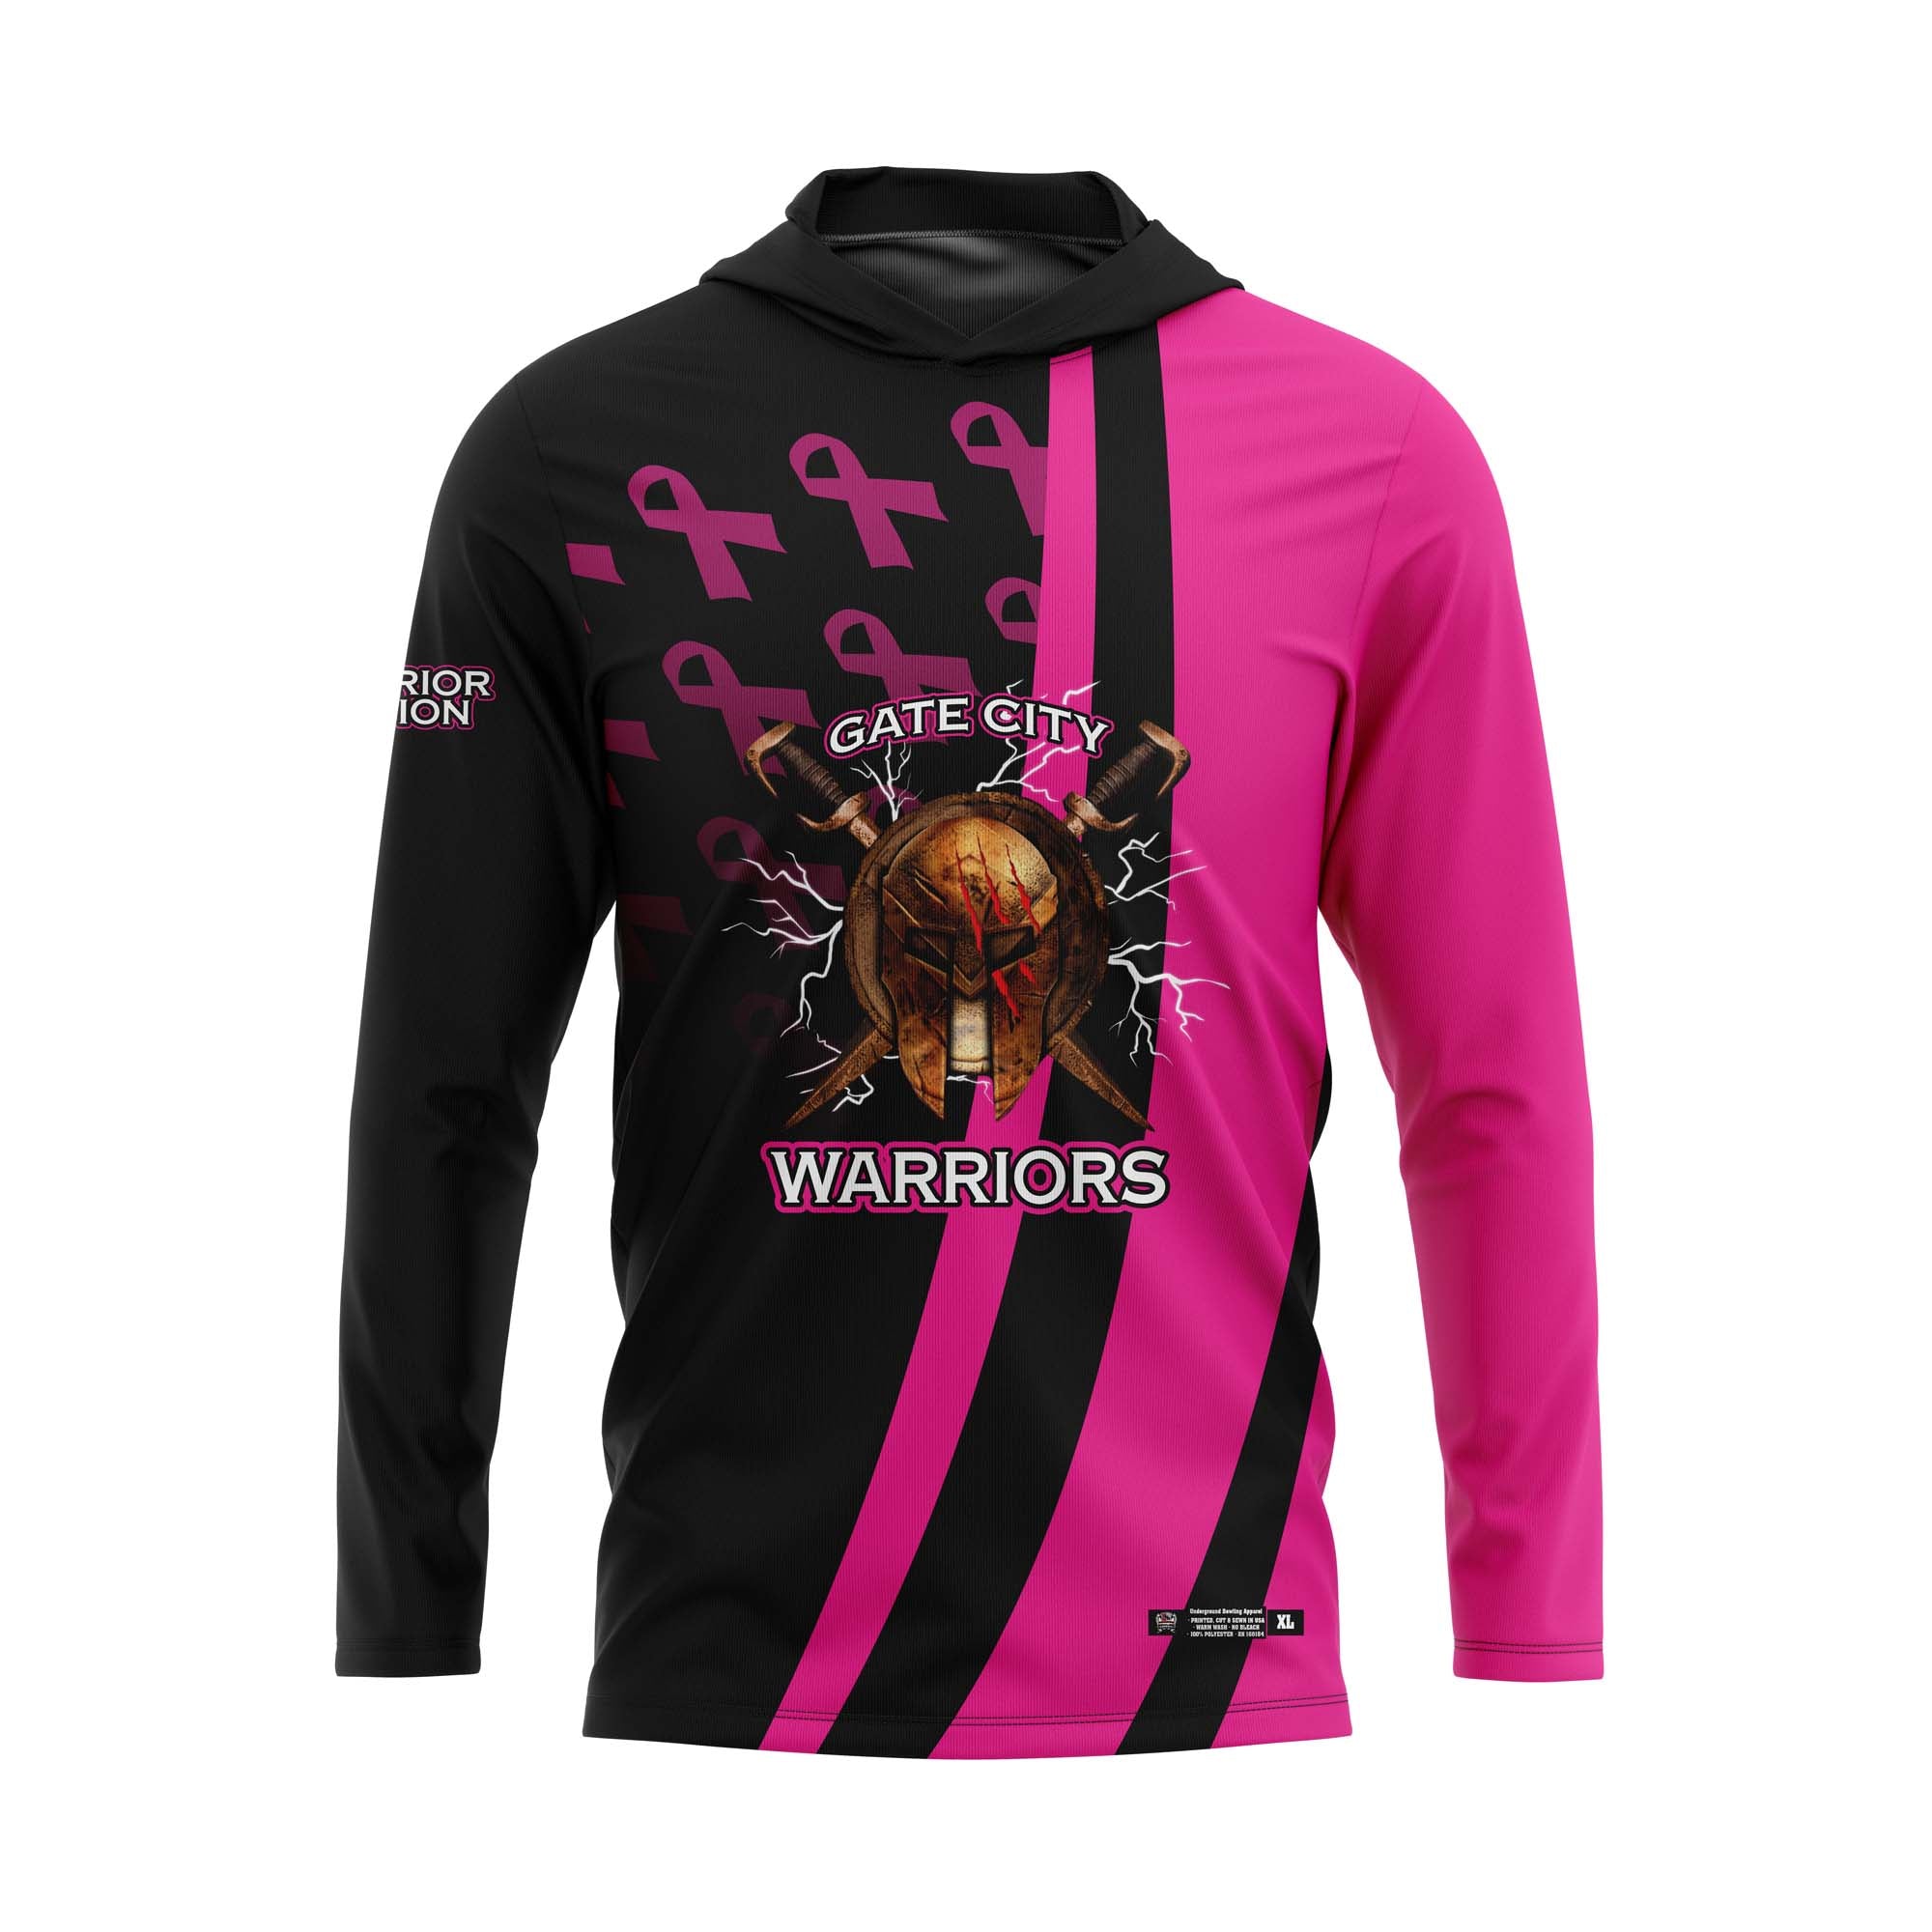 Gate City Warriors Breast Cancer Jersey